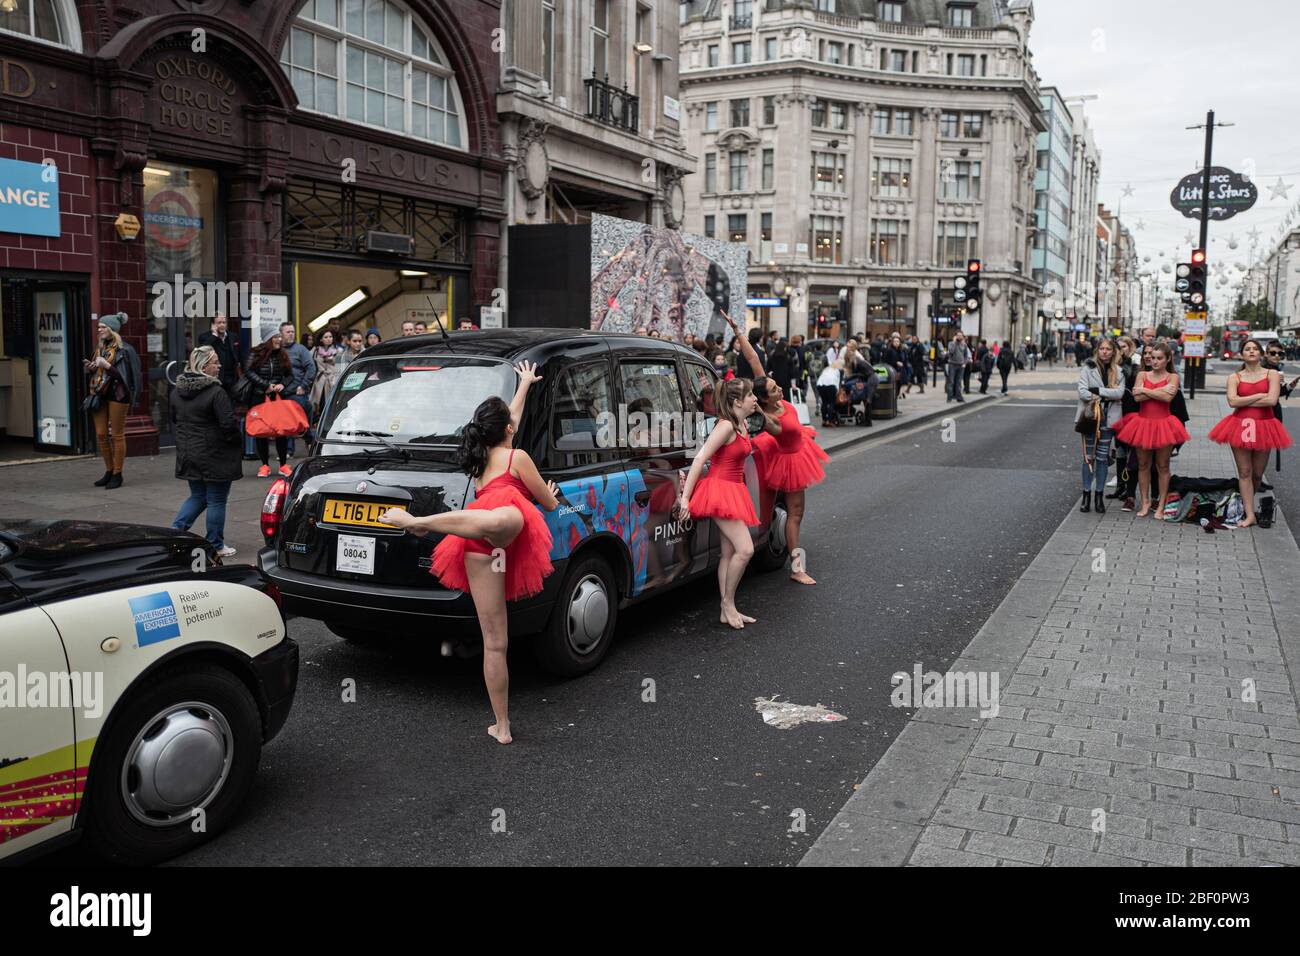 Classic dancers dressed in red performing on the street in London, UK Stock Photo